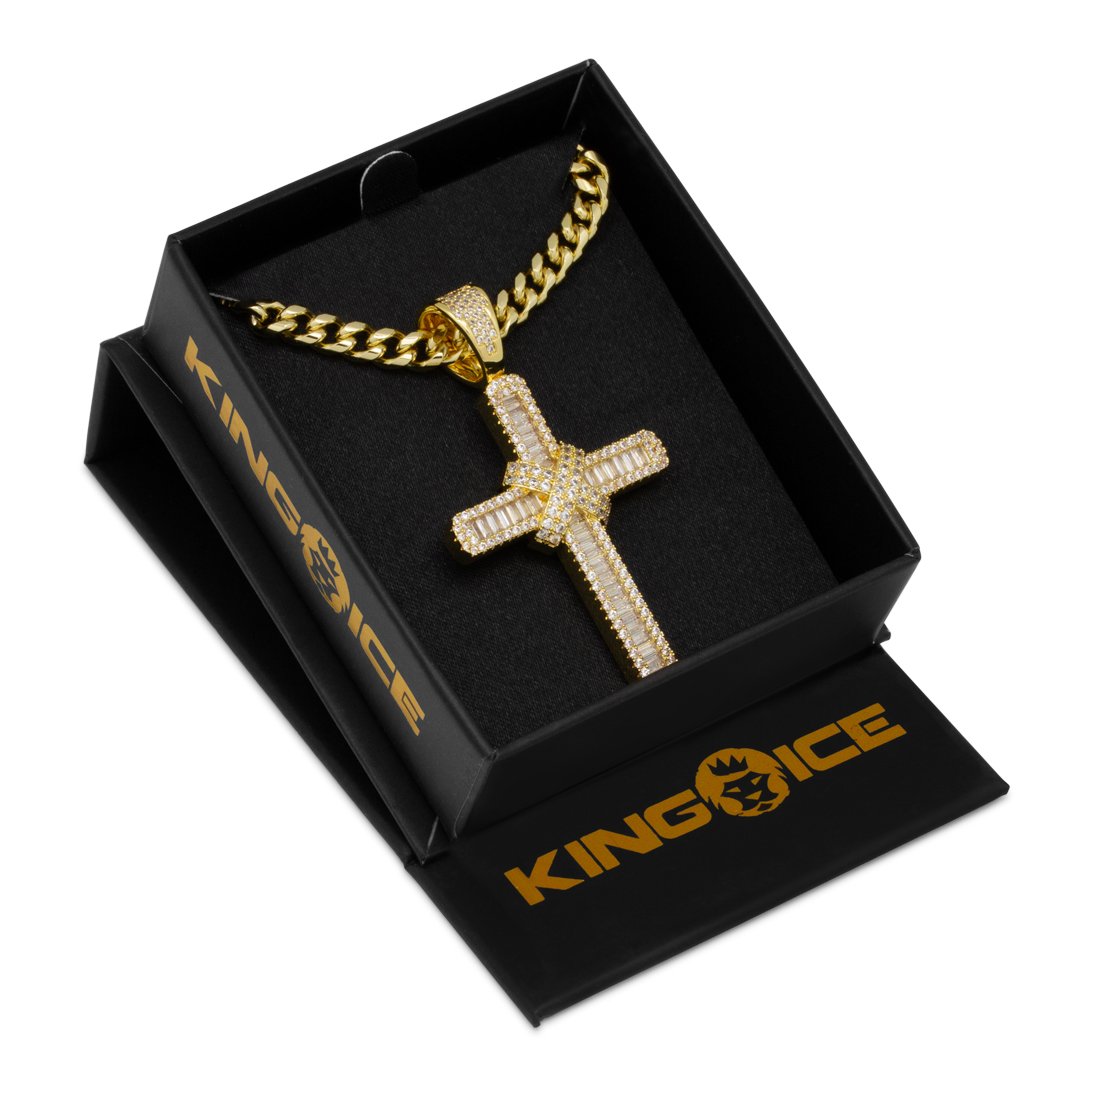 Wrapped Cross Necklace